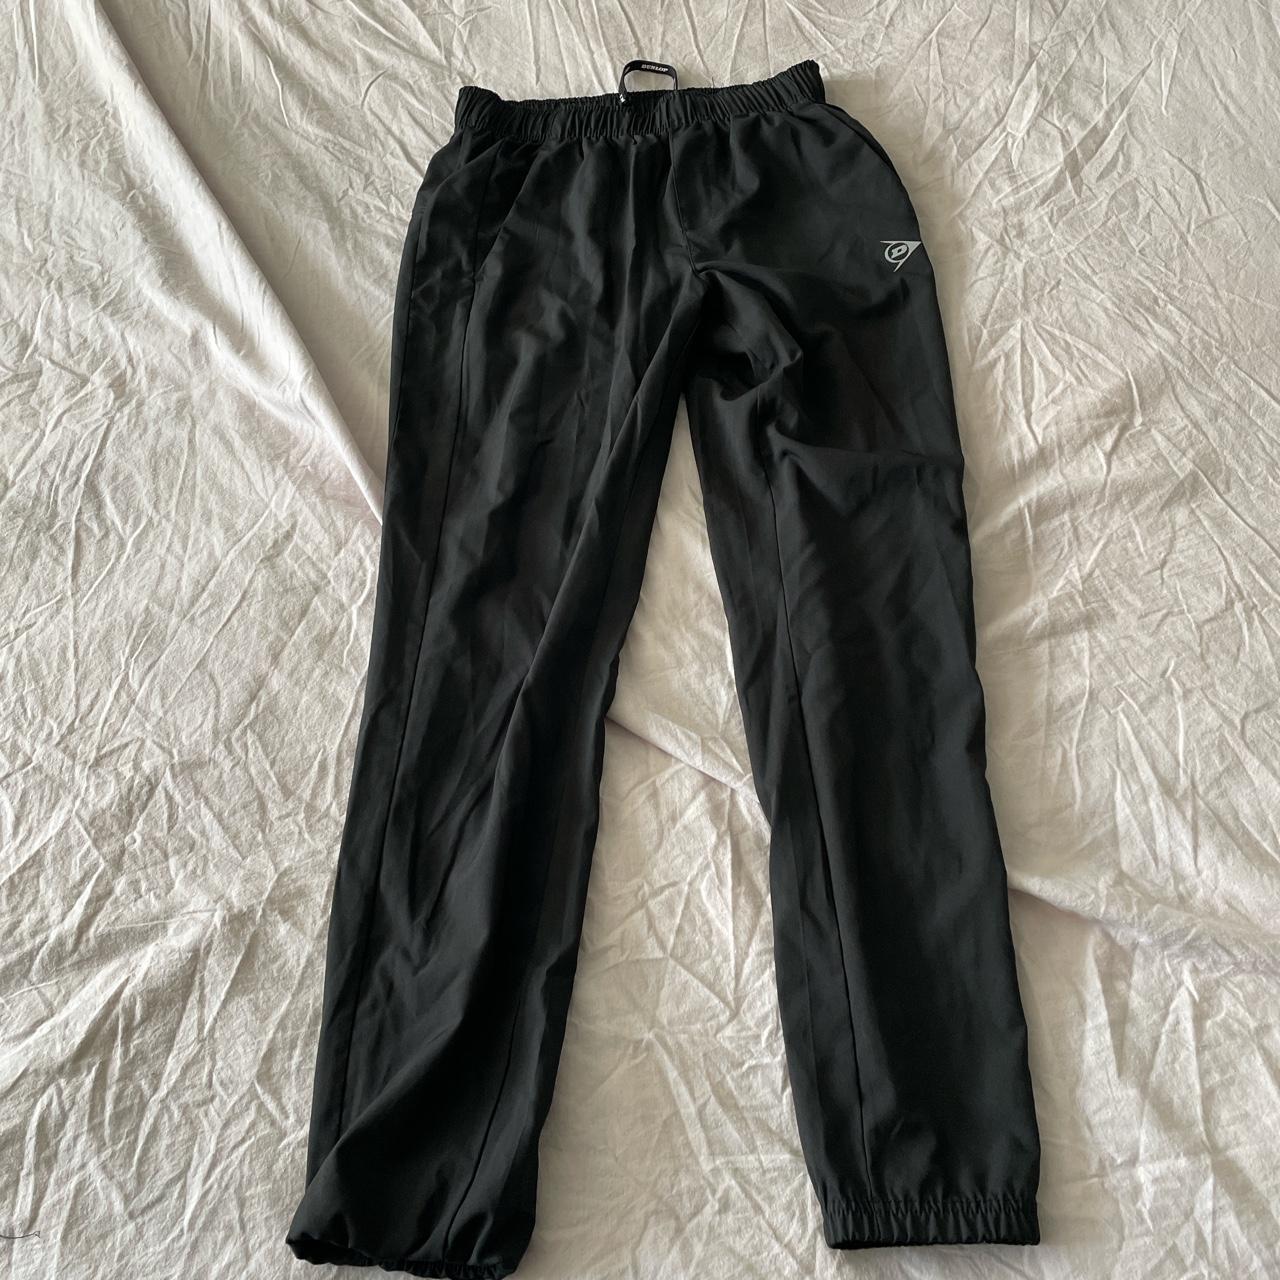 Size S, Breathable Pants, Sweat Absorbent 90%... - Depop